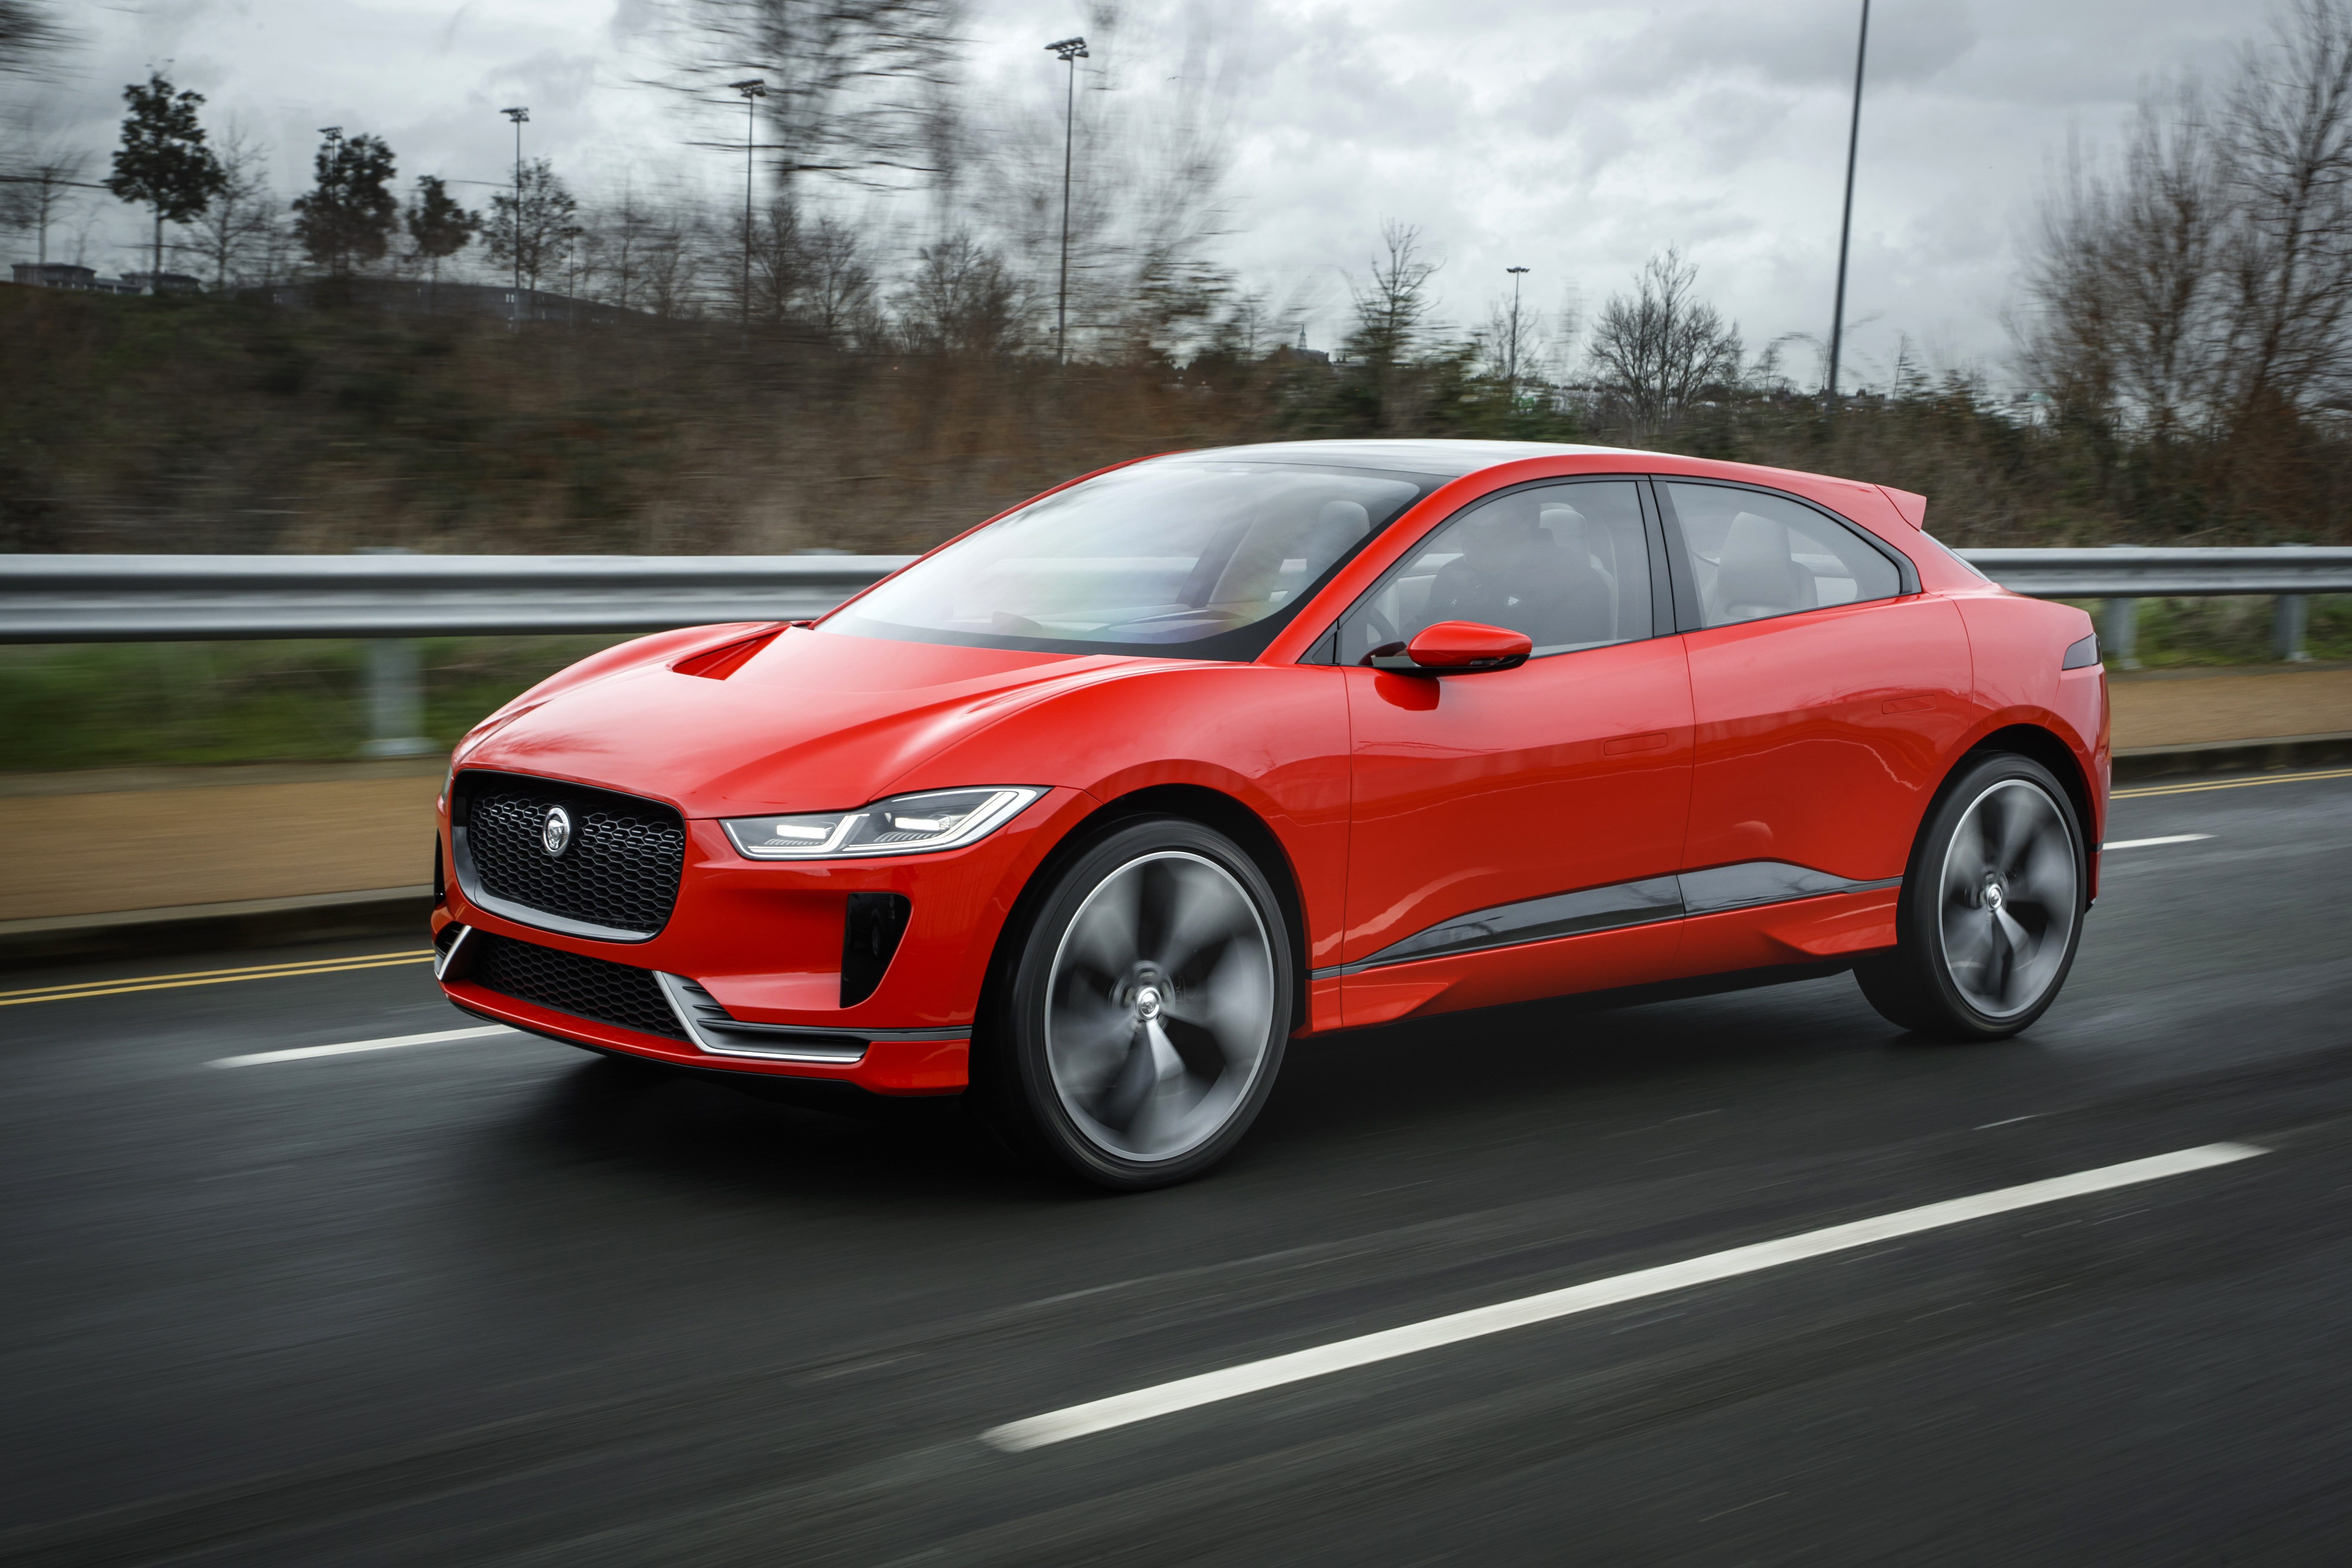 Jaguar I-Pace Is On The Road, TomTom Expands The View, INFINITI’s New Design Leader